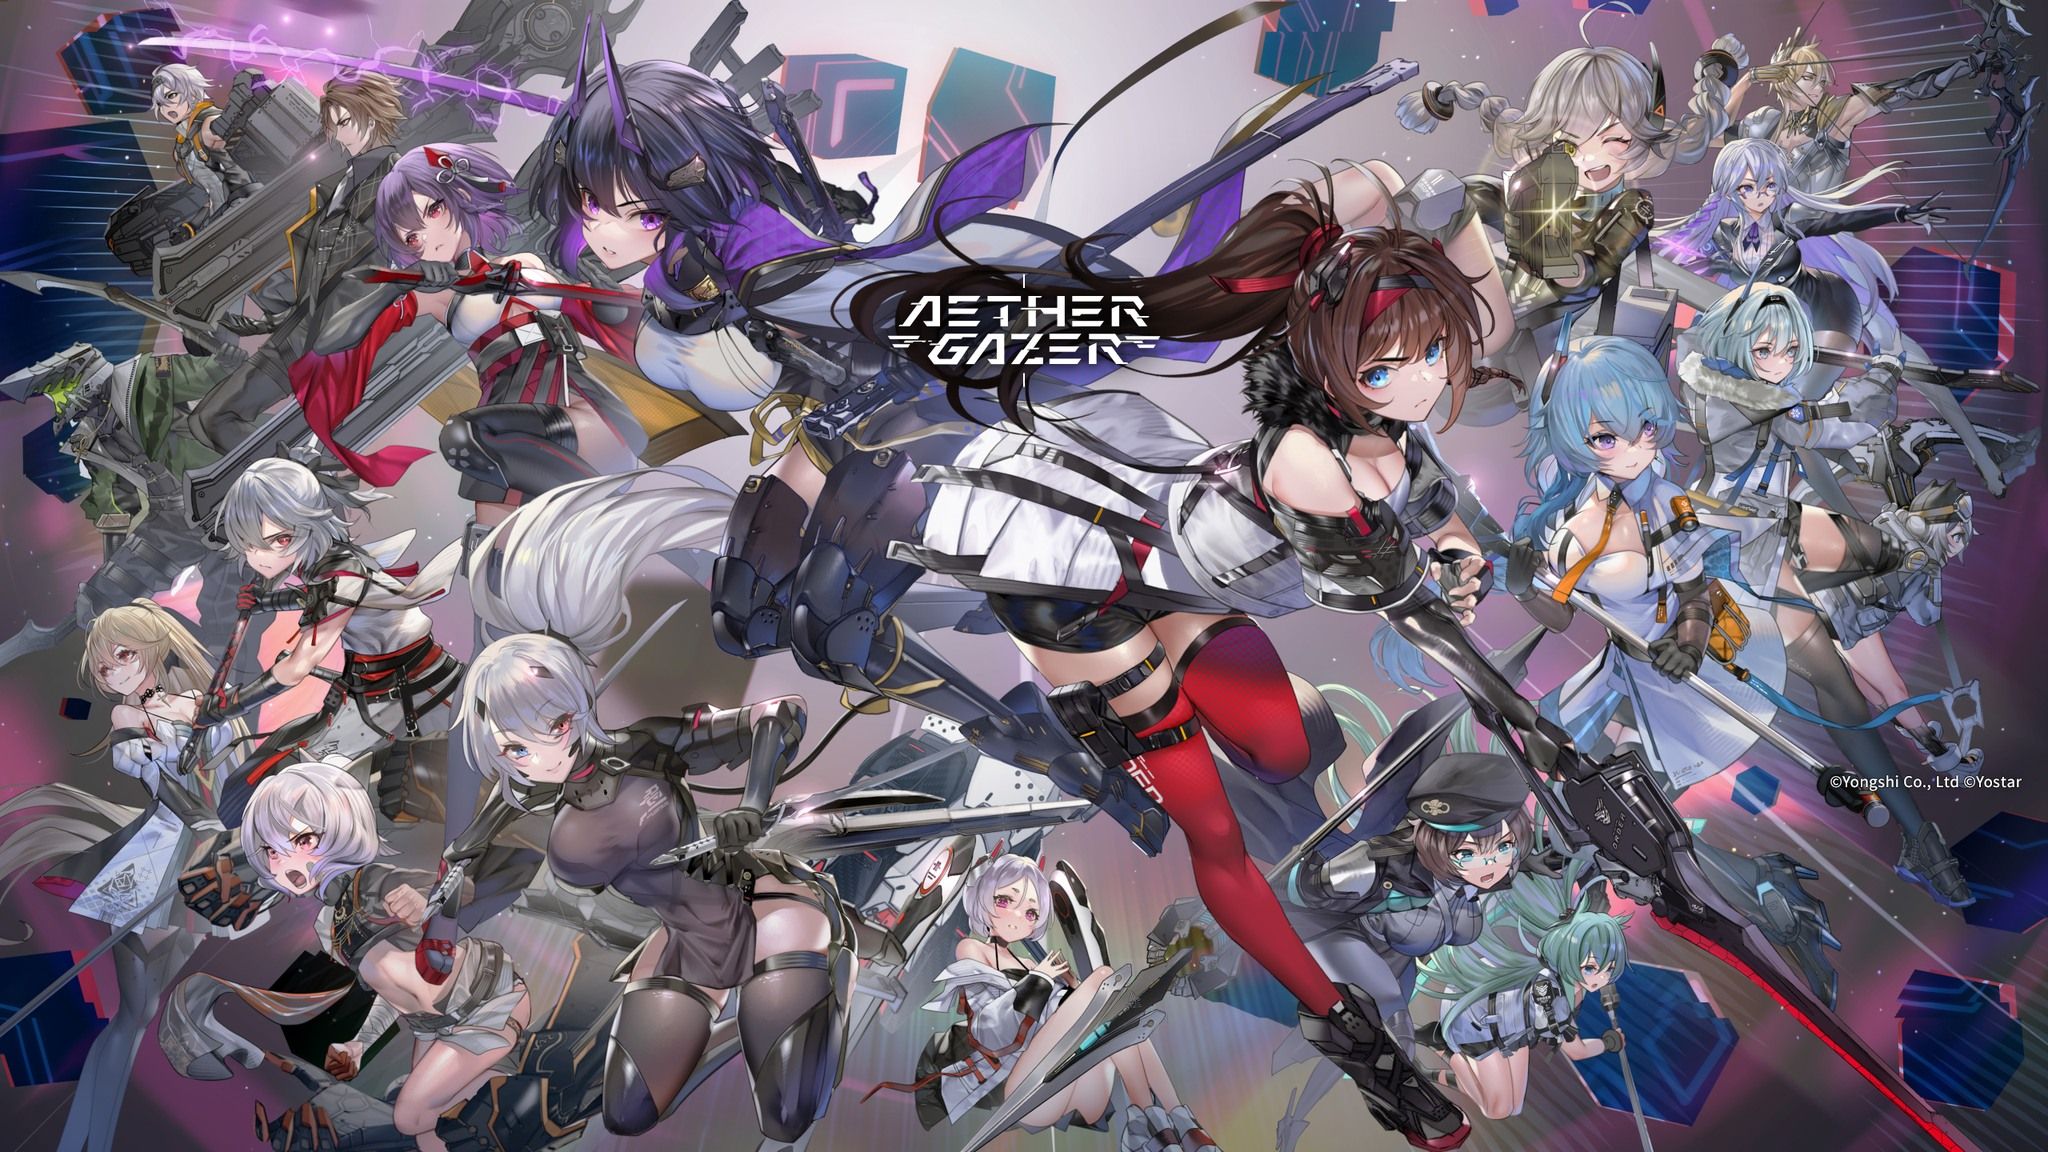 Featured image for Yostar's Aether Gazer celebrating Global launch